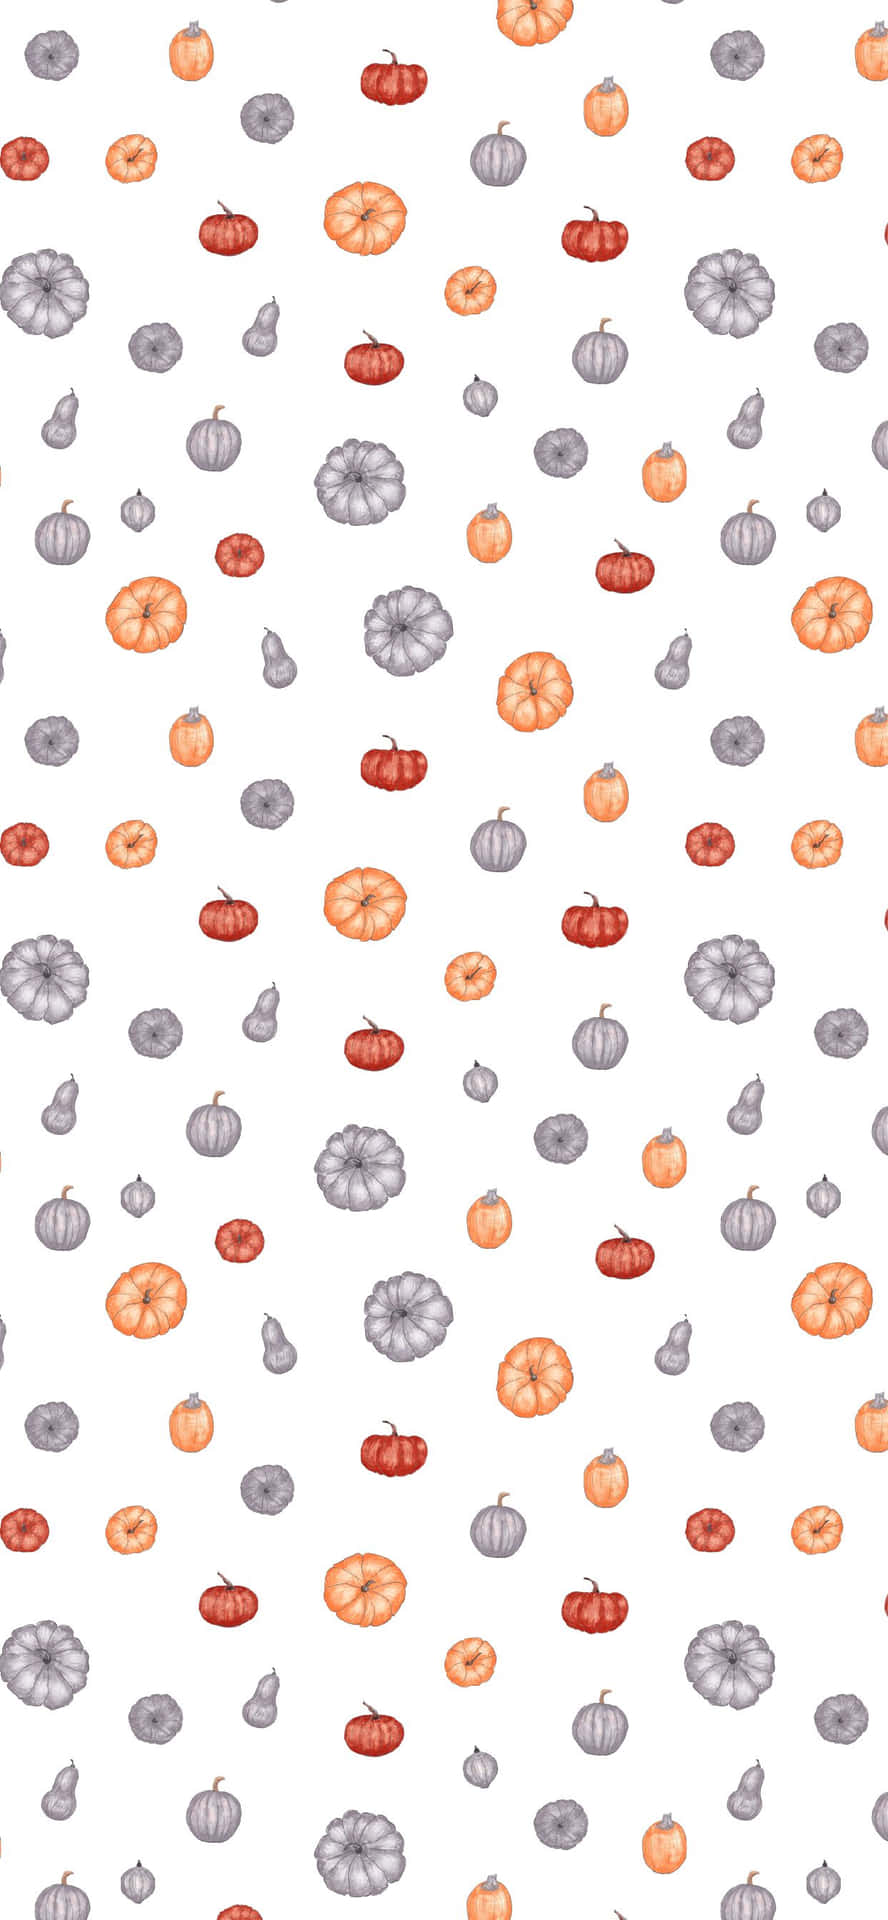 Vibrant colors for this unique fall pattern! Wallpaper